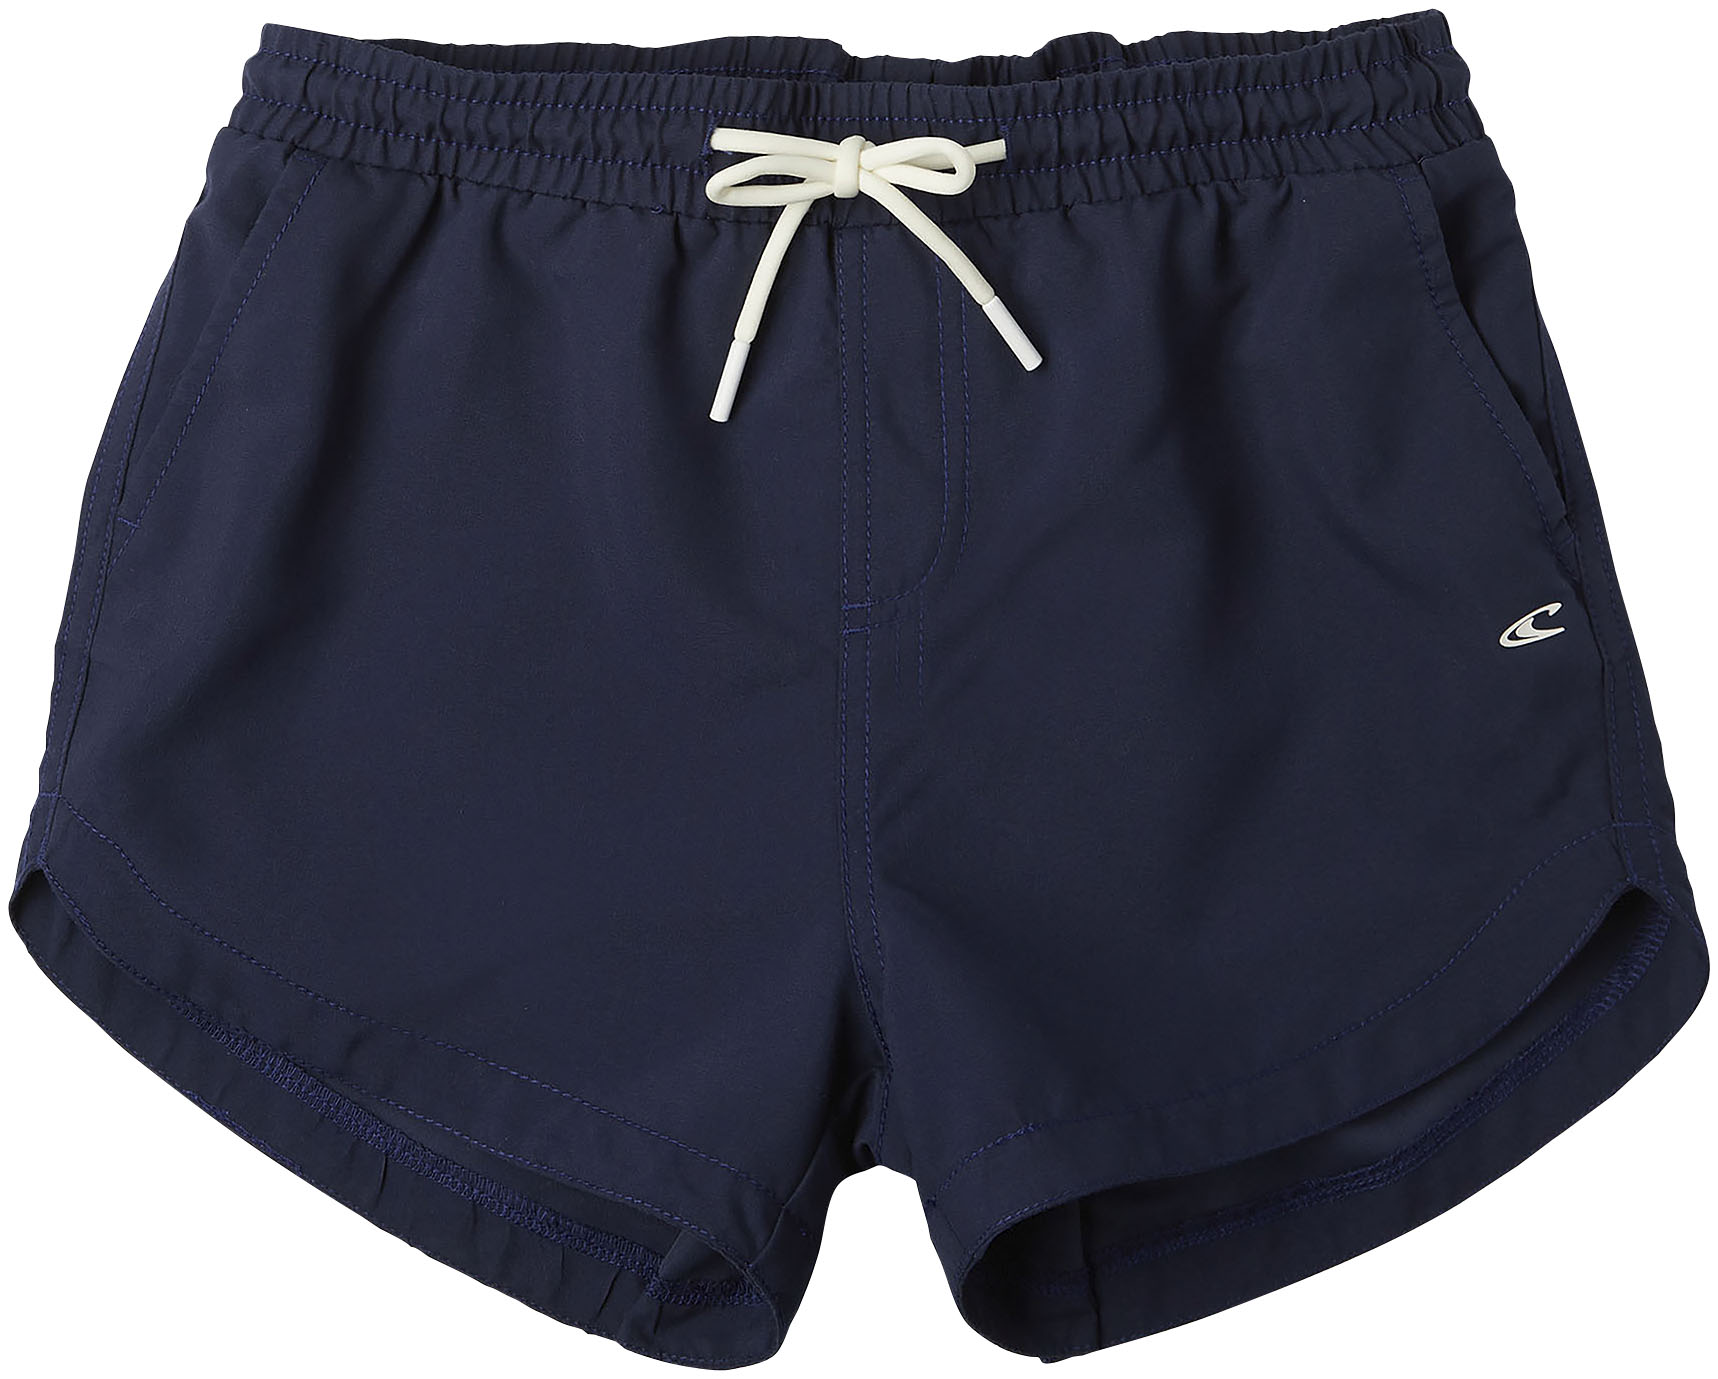 O'Neill Badeshorts »ESSENTIALS ANGLET SOLID SWIMSHORTS« von O'Neill